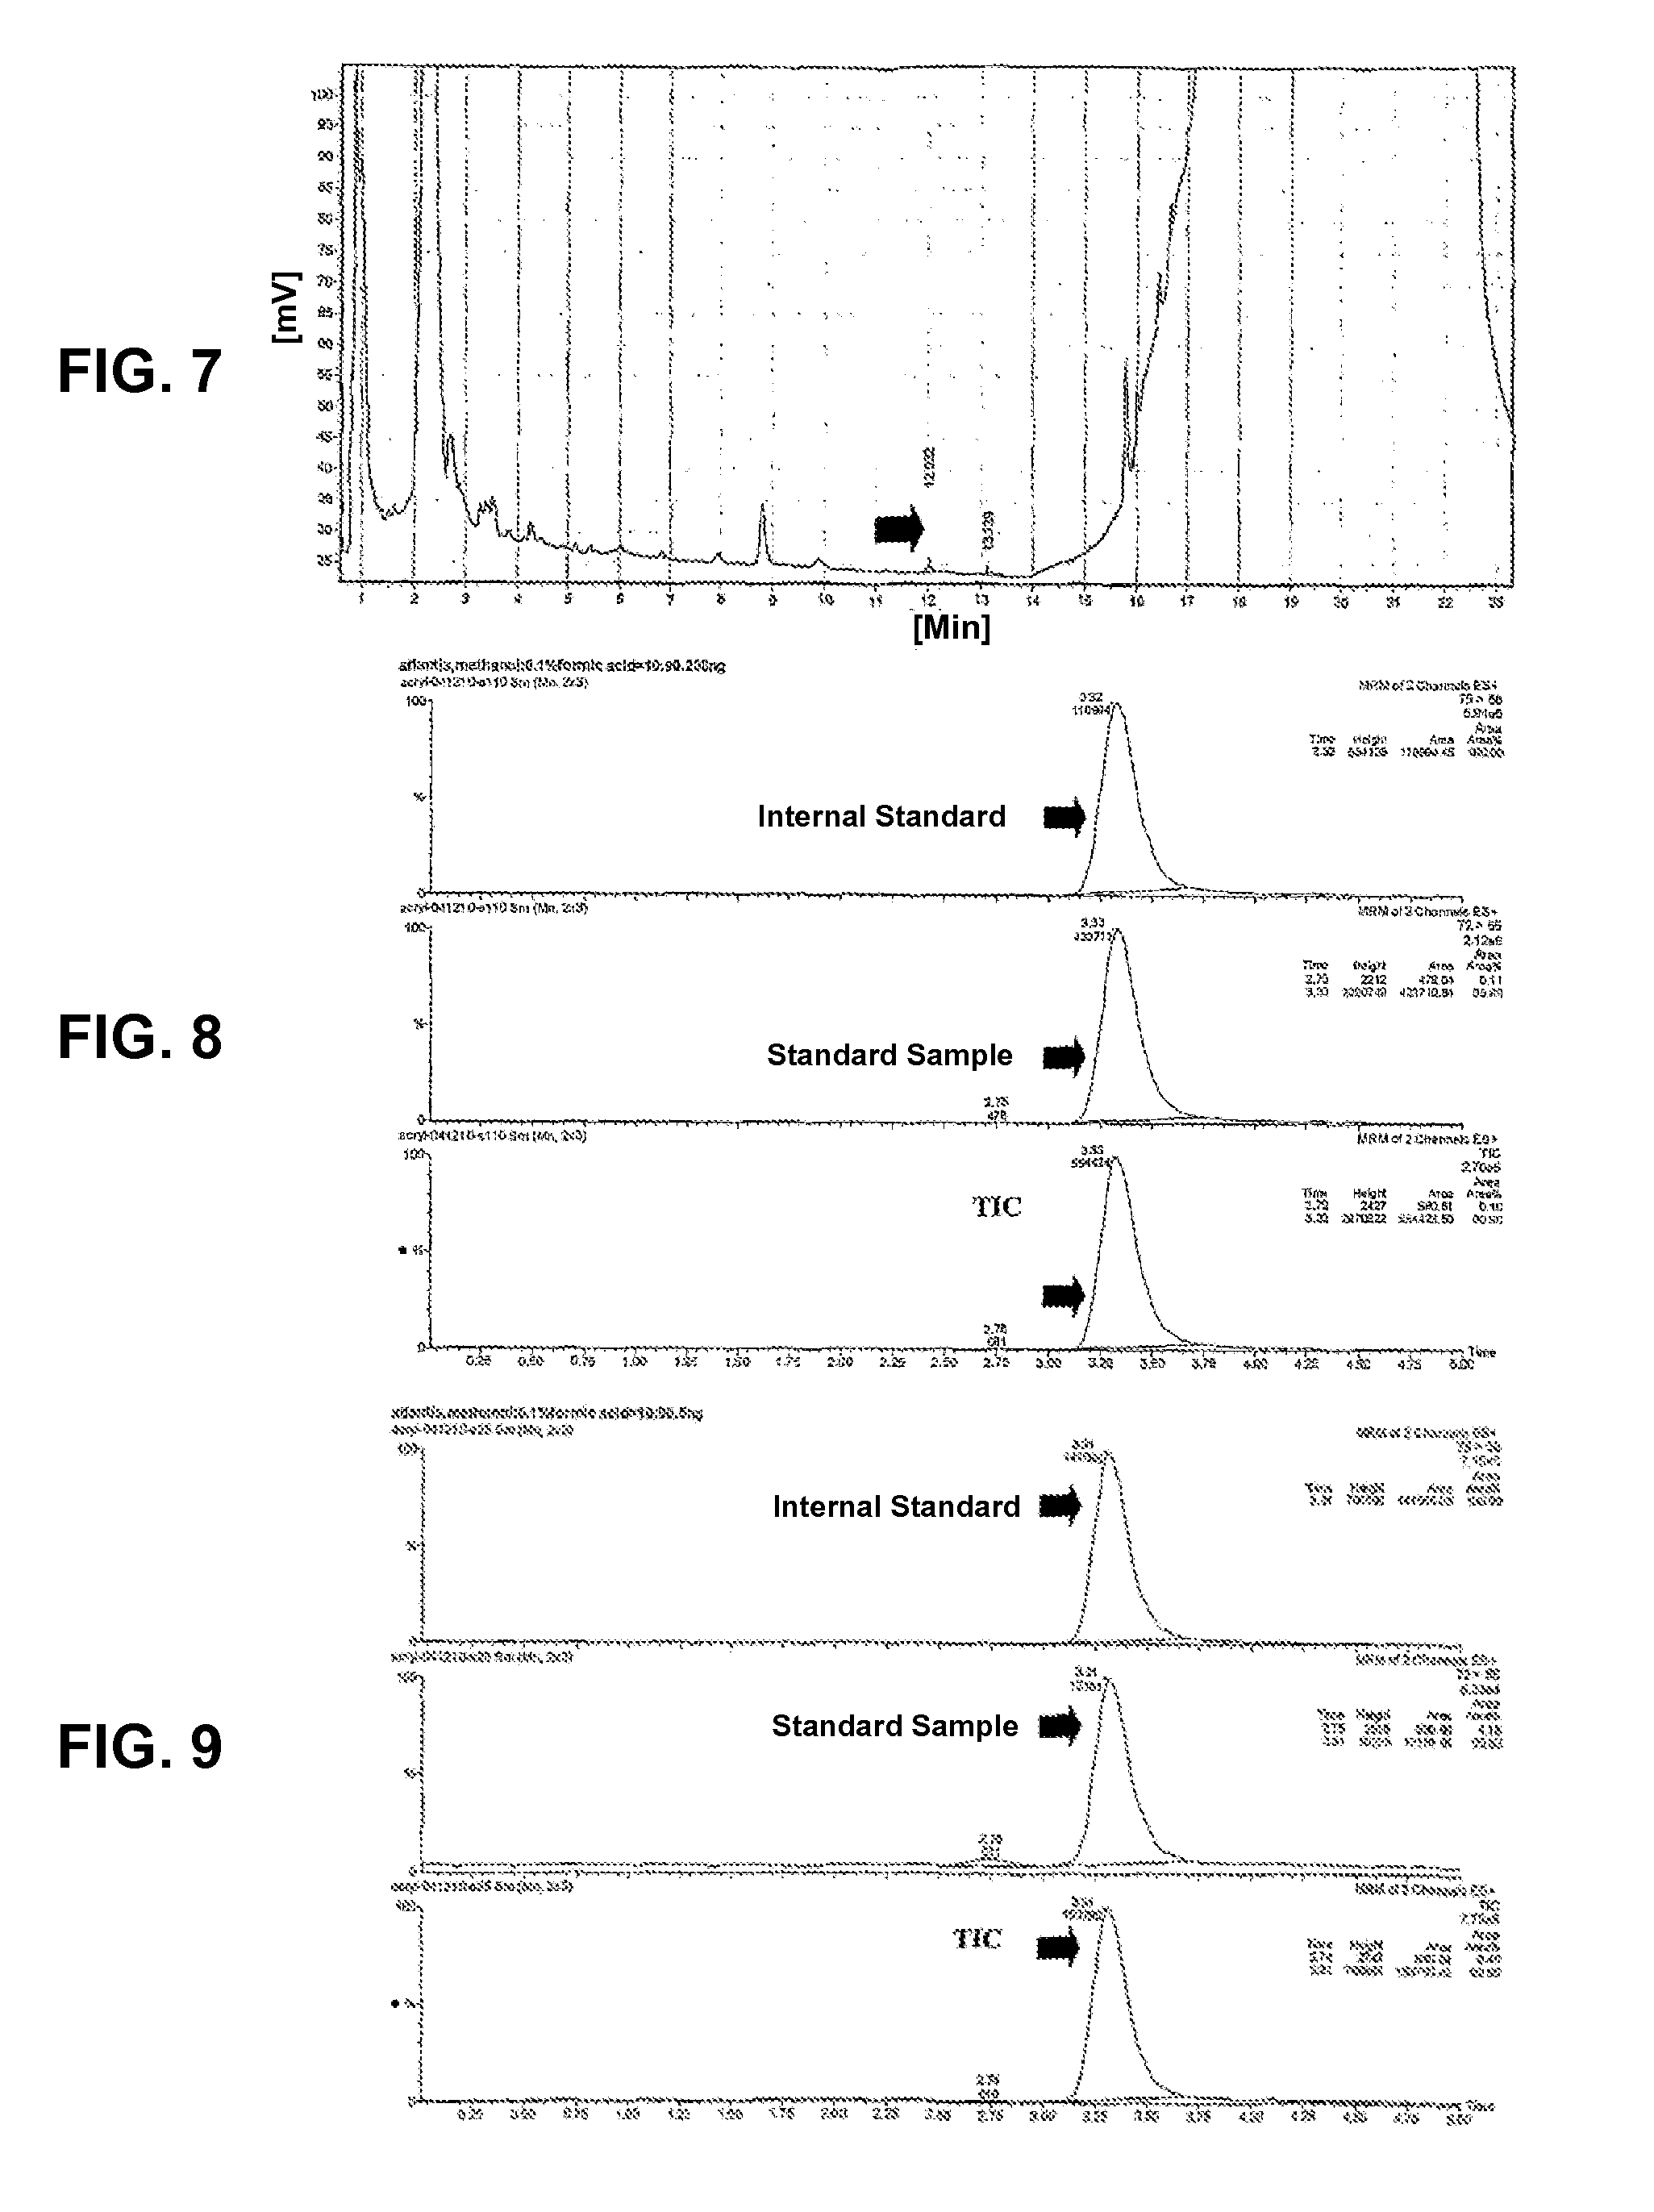 Method for using bamboo leaf extract as acrylamide inhibitor for heat processing food